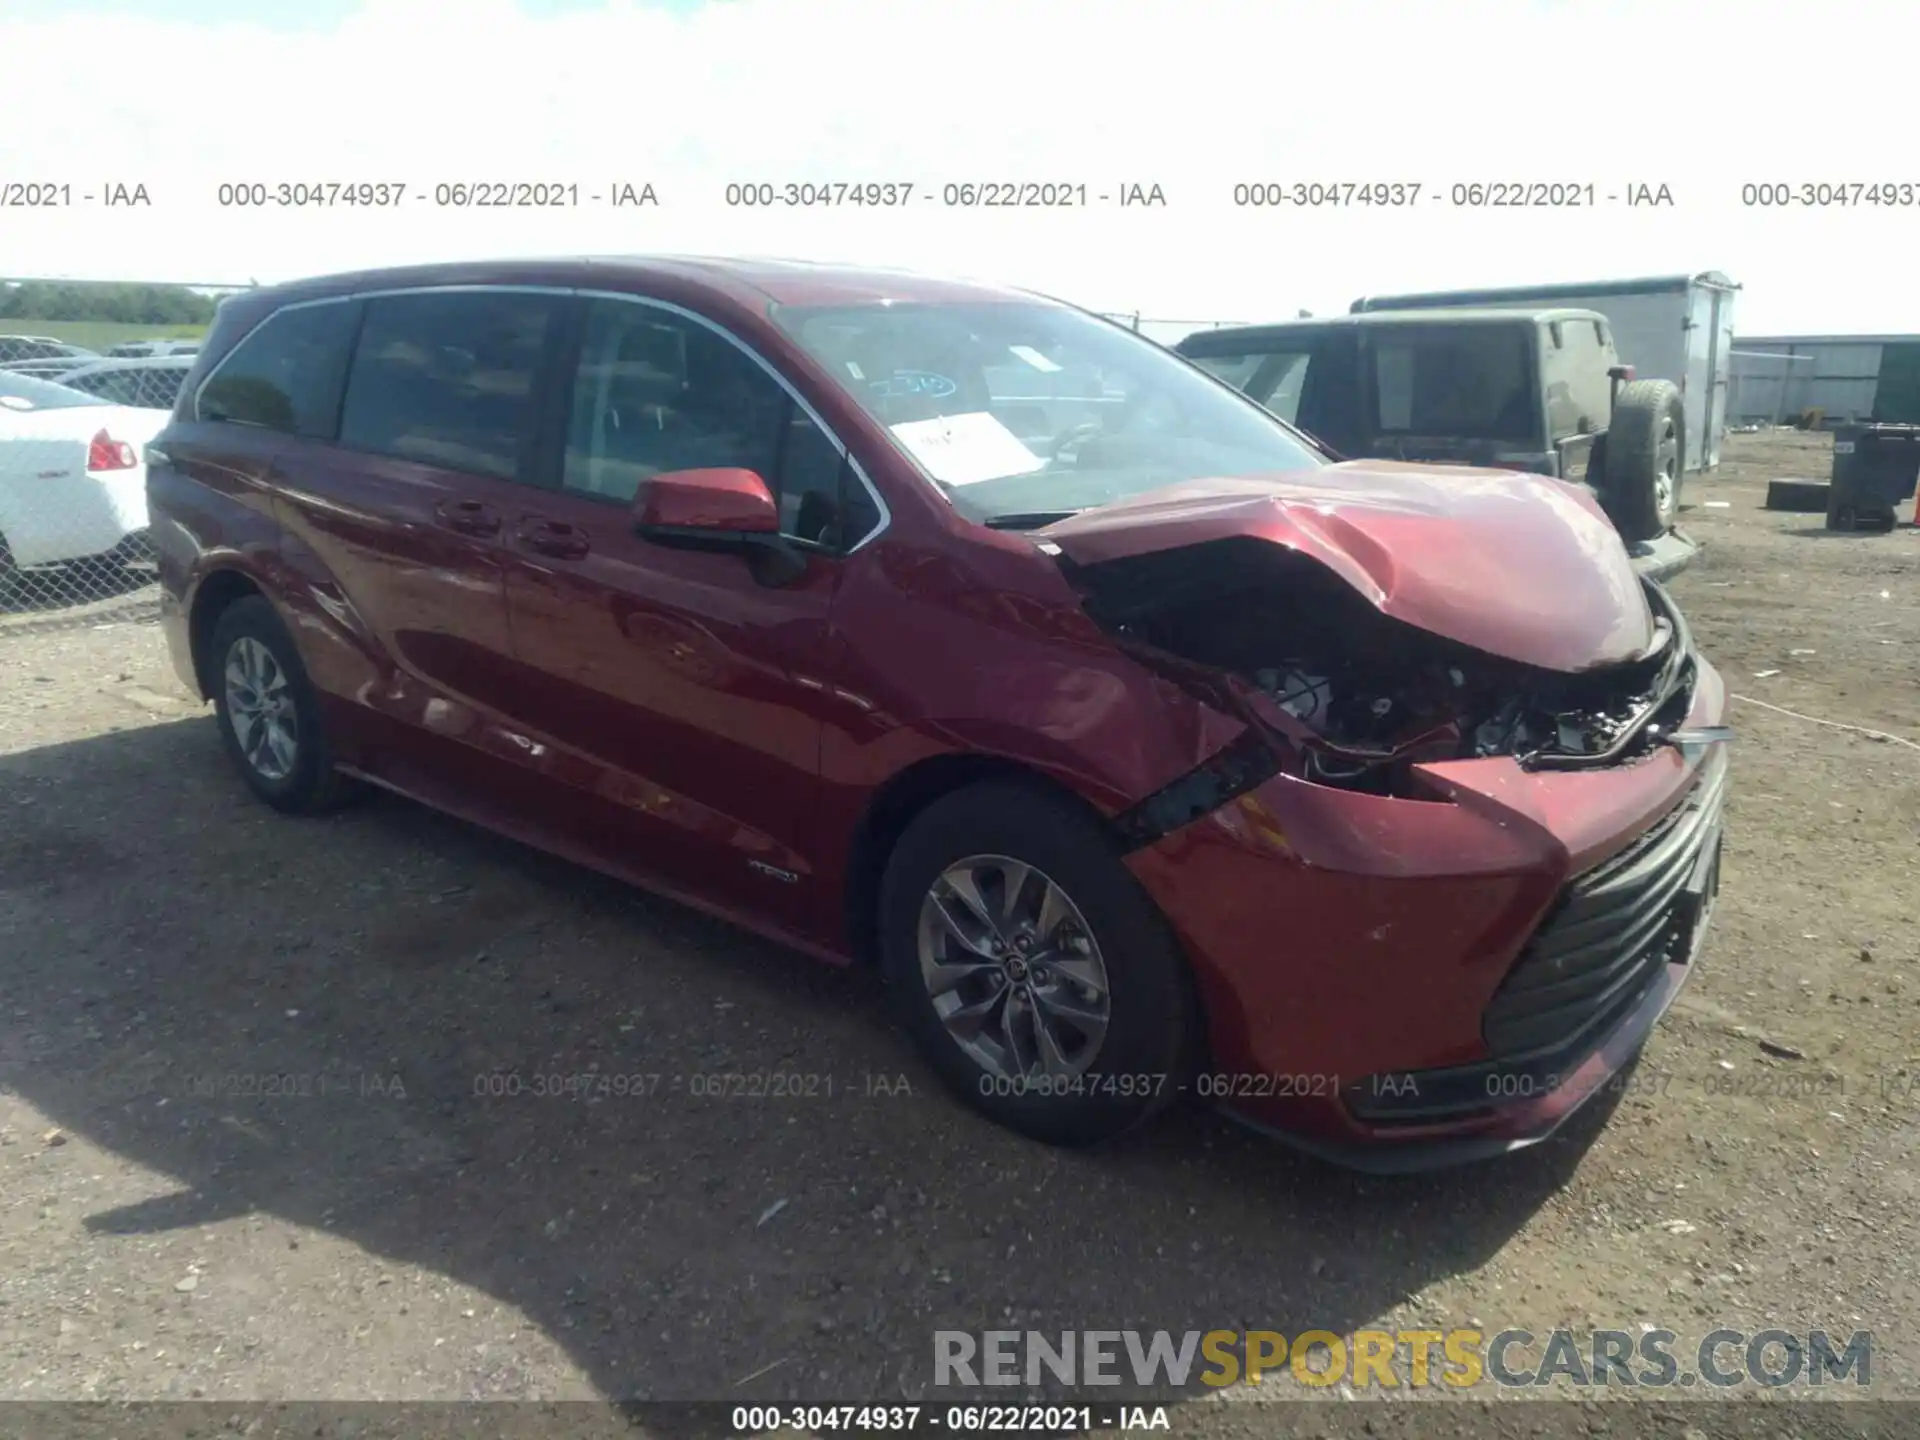 1 Photograph of a damaged car 5TDKRKEC0MS027781 TOYOTA SIENNA 2021